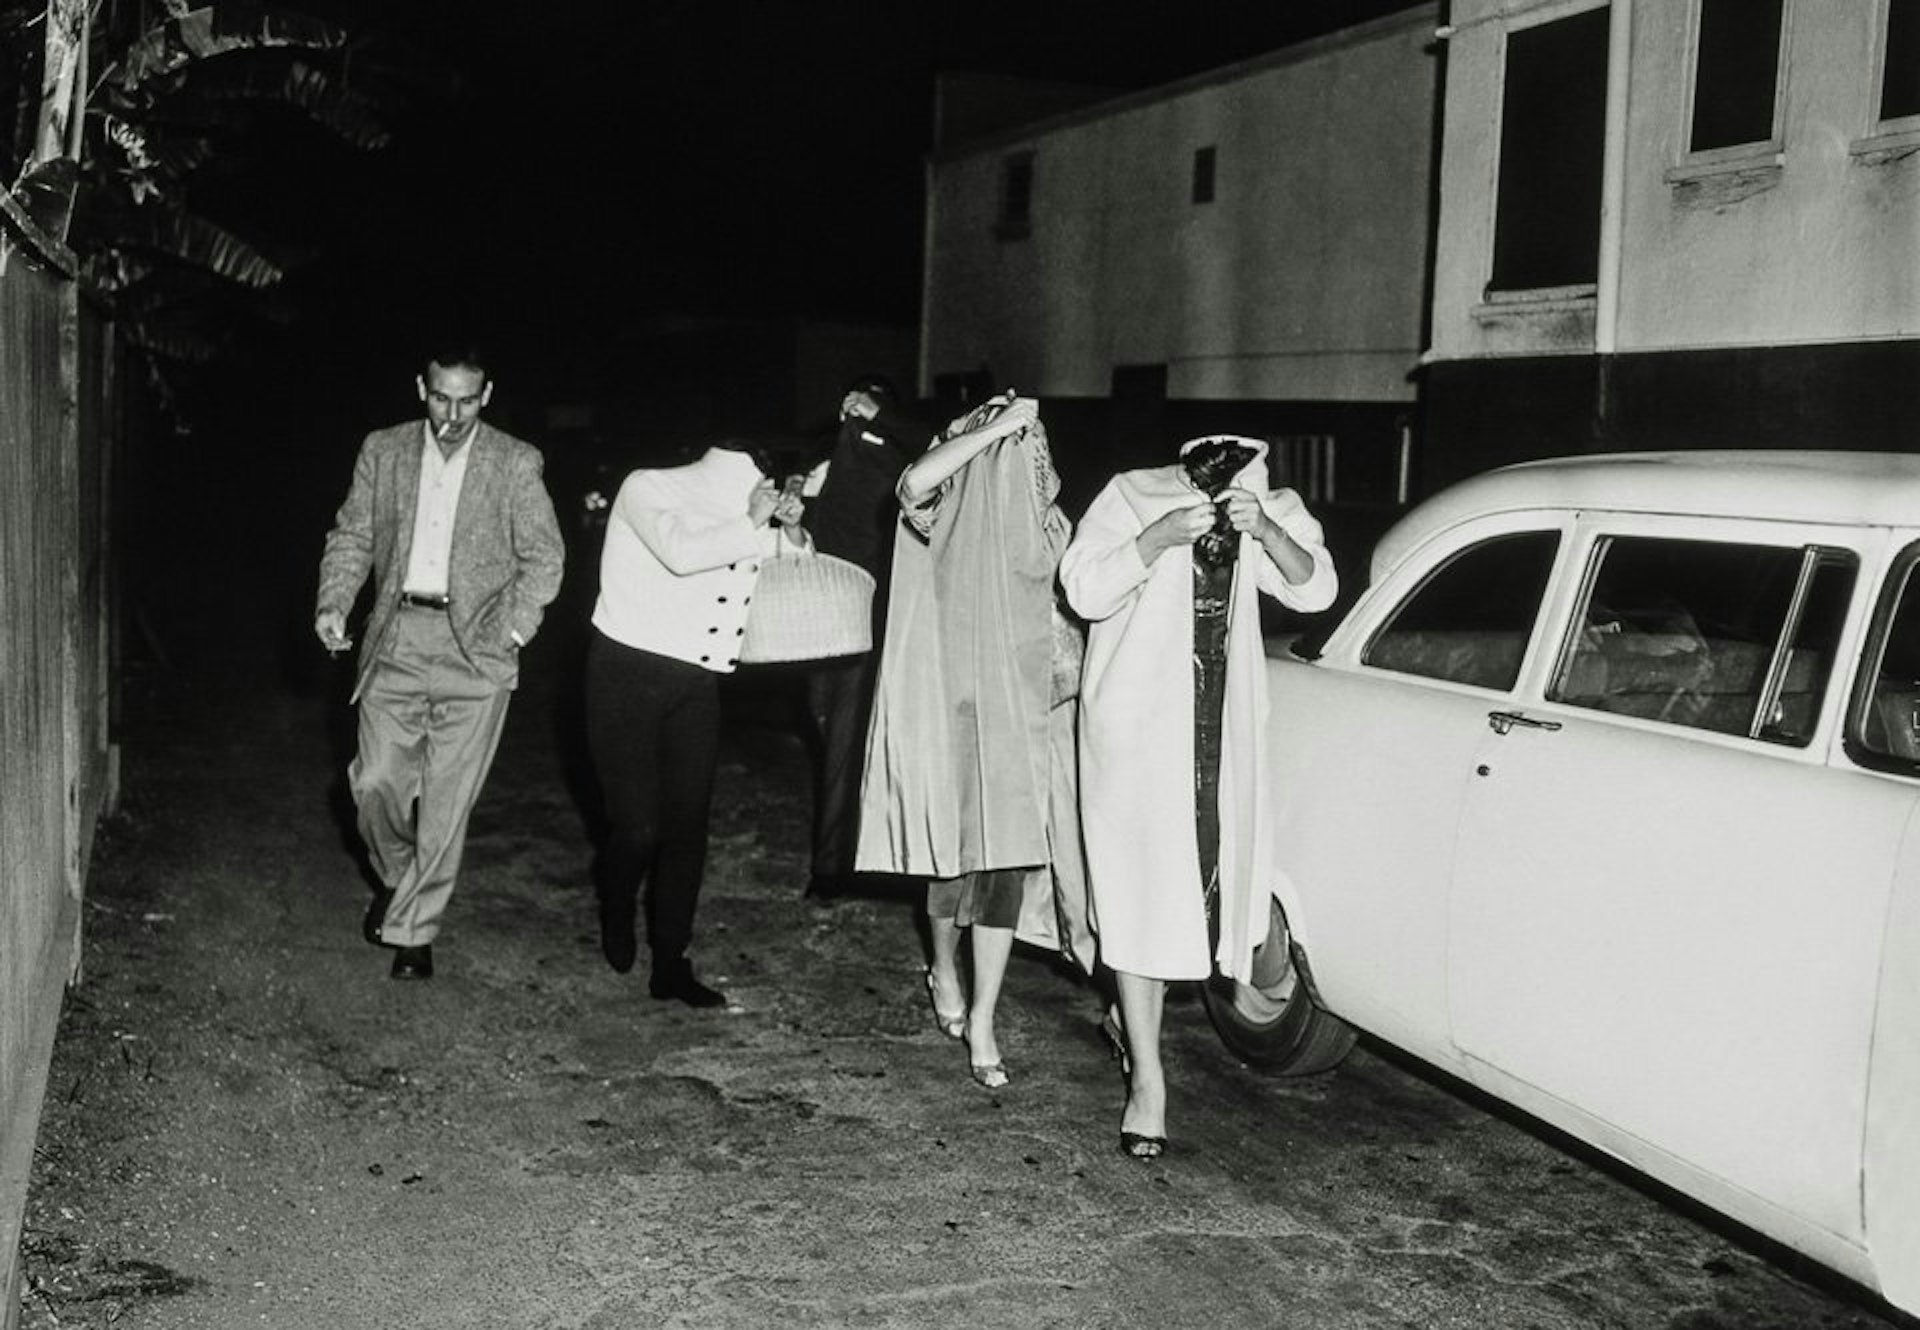 A bevy of hookers cover up after a vice squad raid at the Carolina Pines Restaurant on Melrose Avenue, ca. 1957. Copyright: Cliff Wesselmann, Photo Courtesy of Gregory Paul Williams, BL Press LLC / TASCHEN